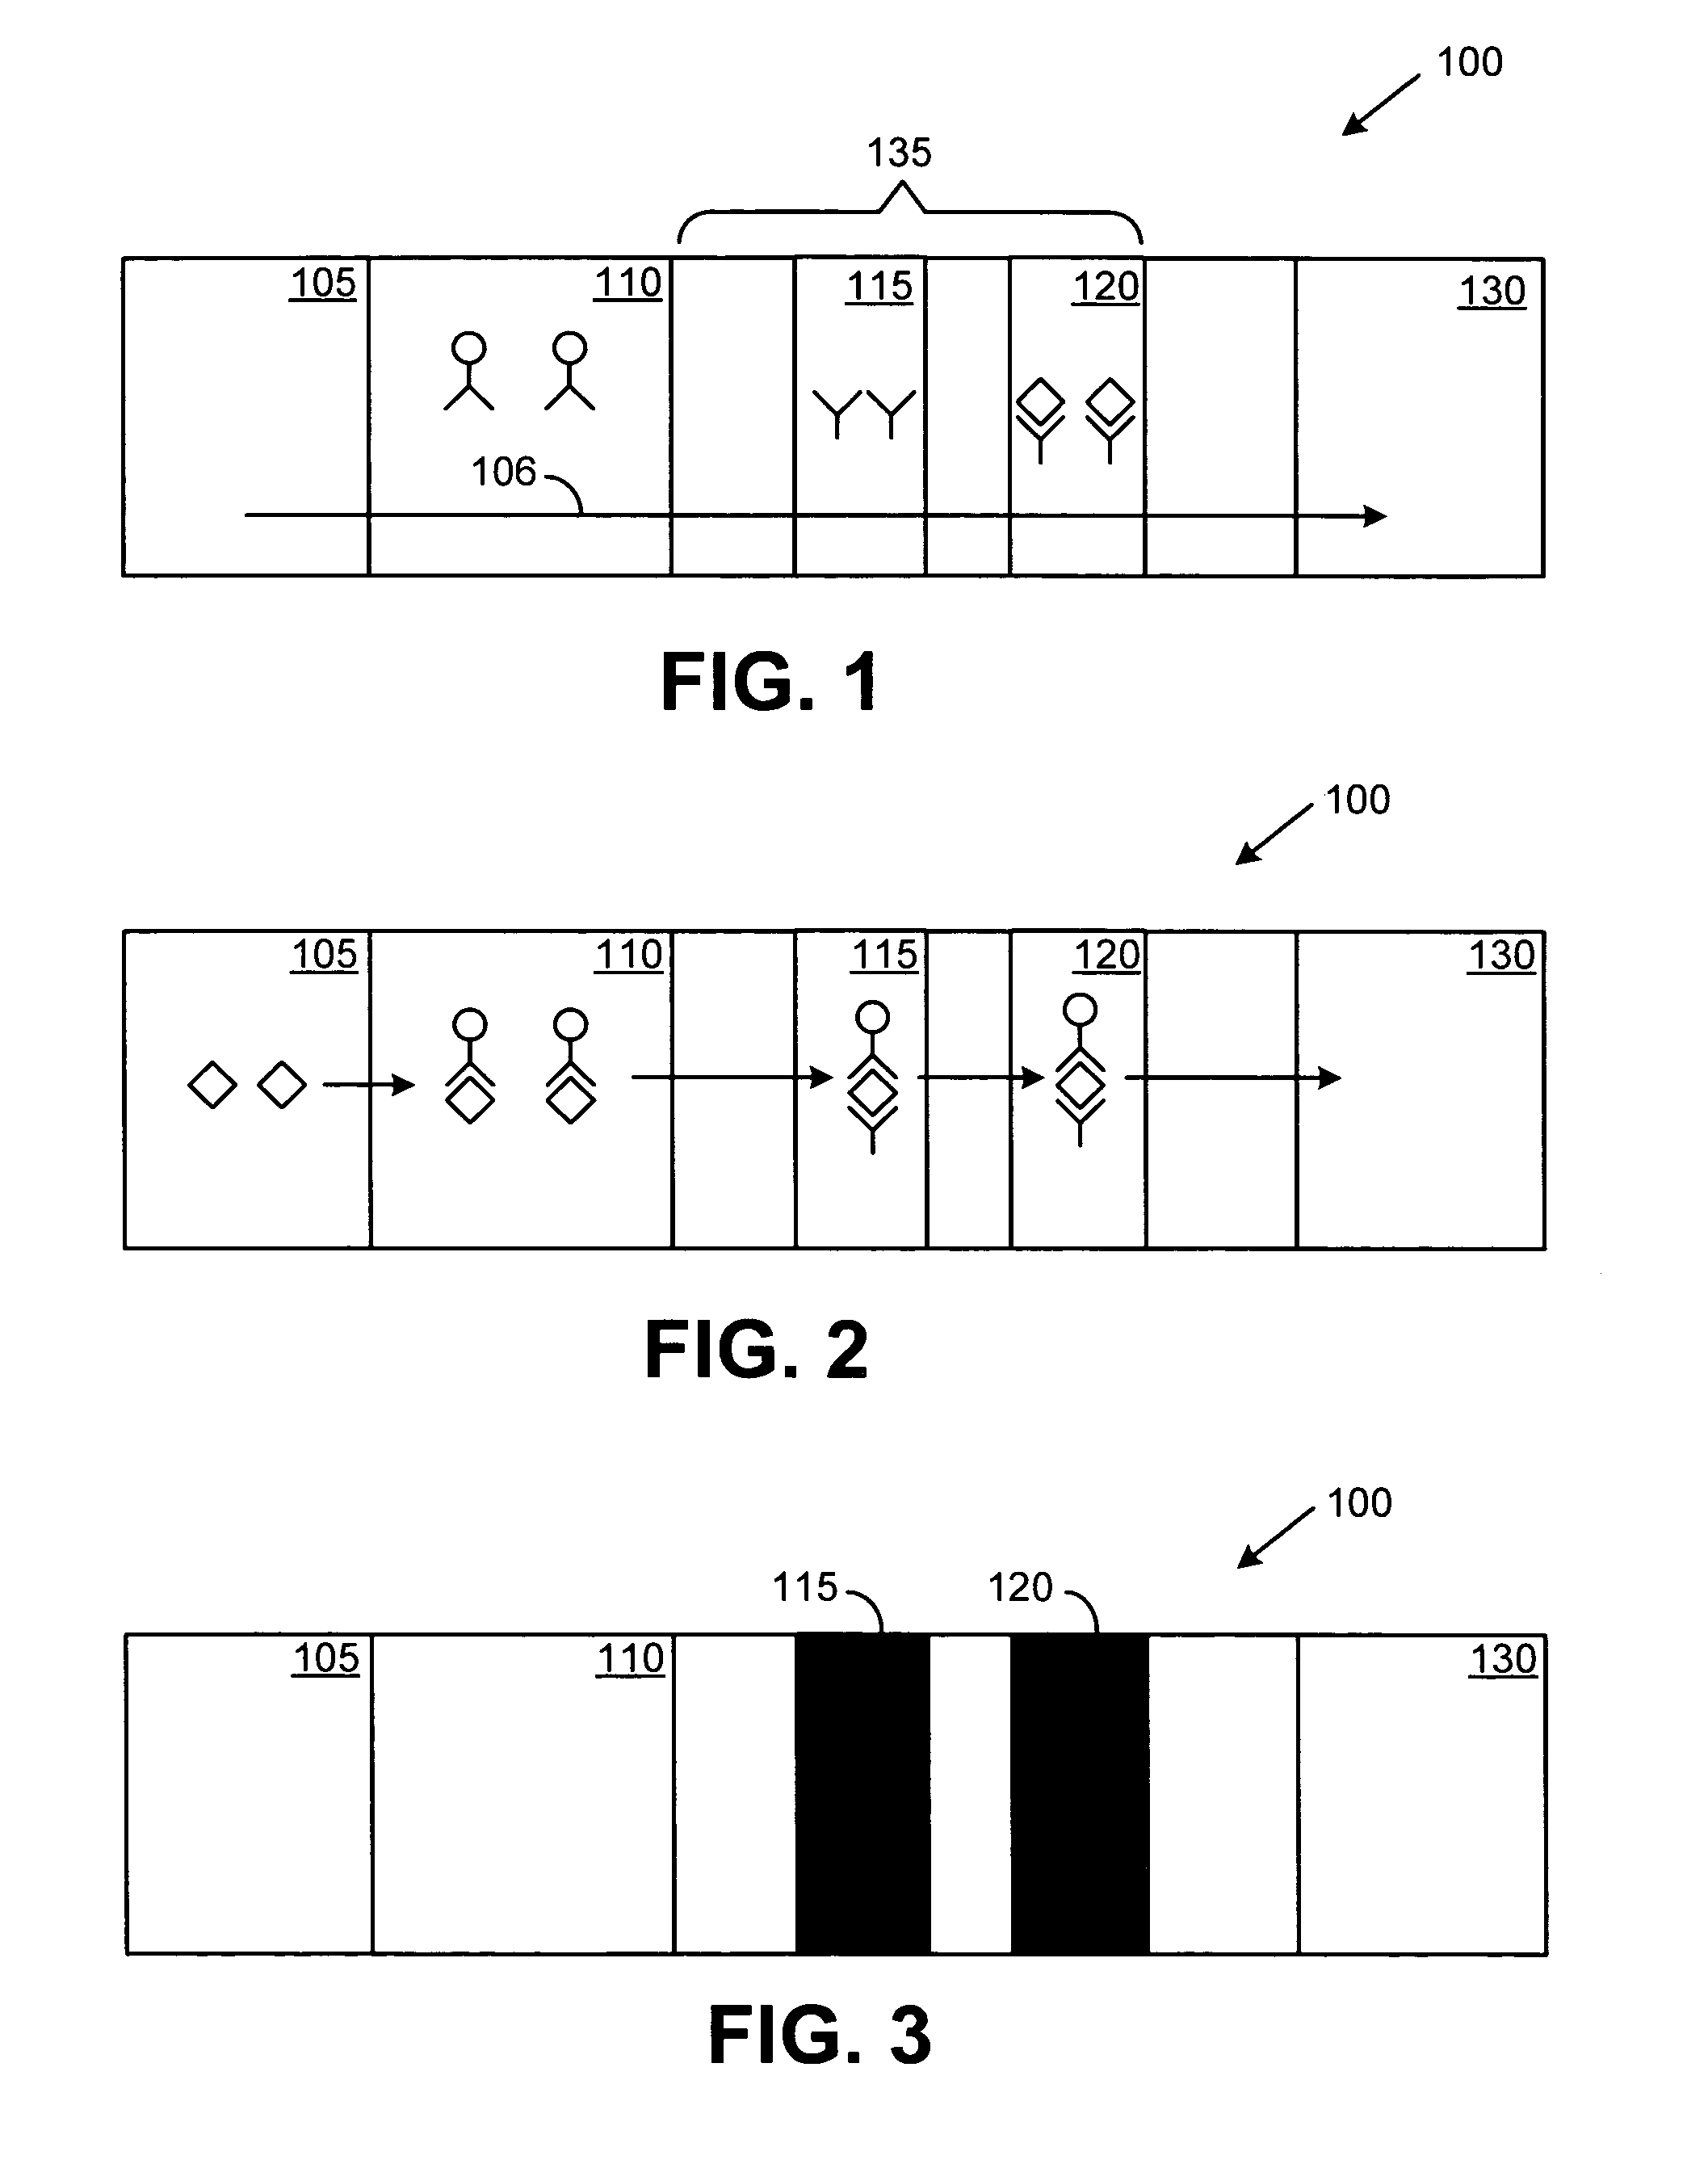 Rapid diagnostic test systems and methods